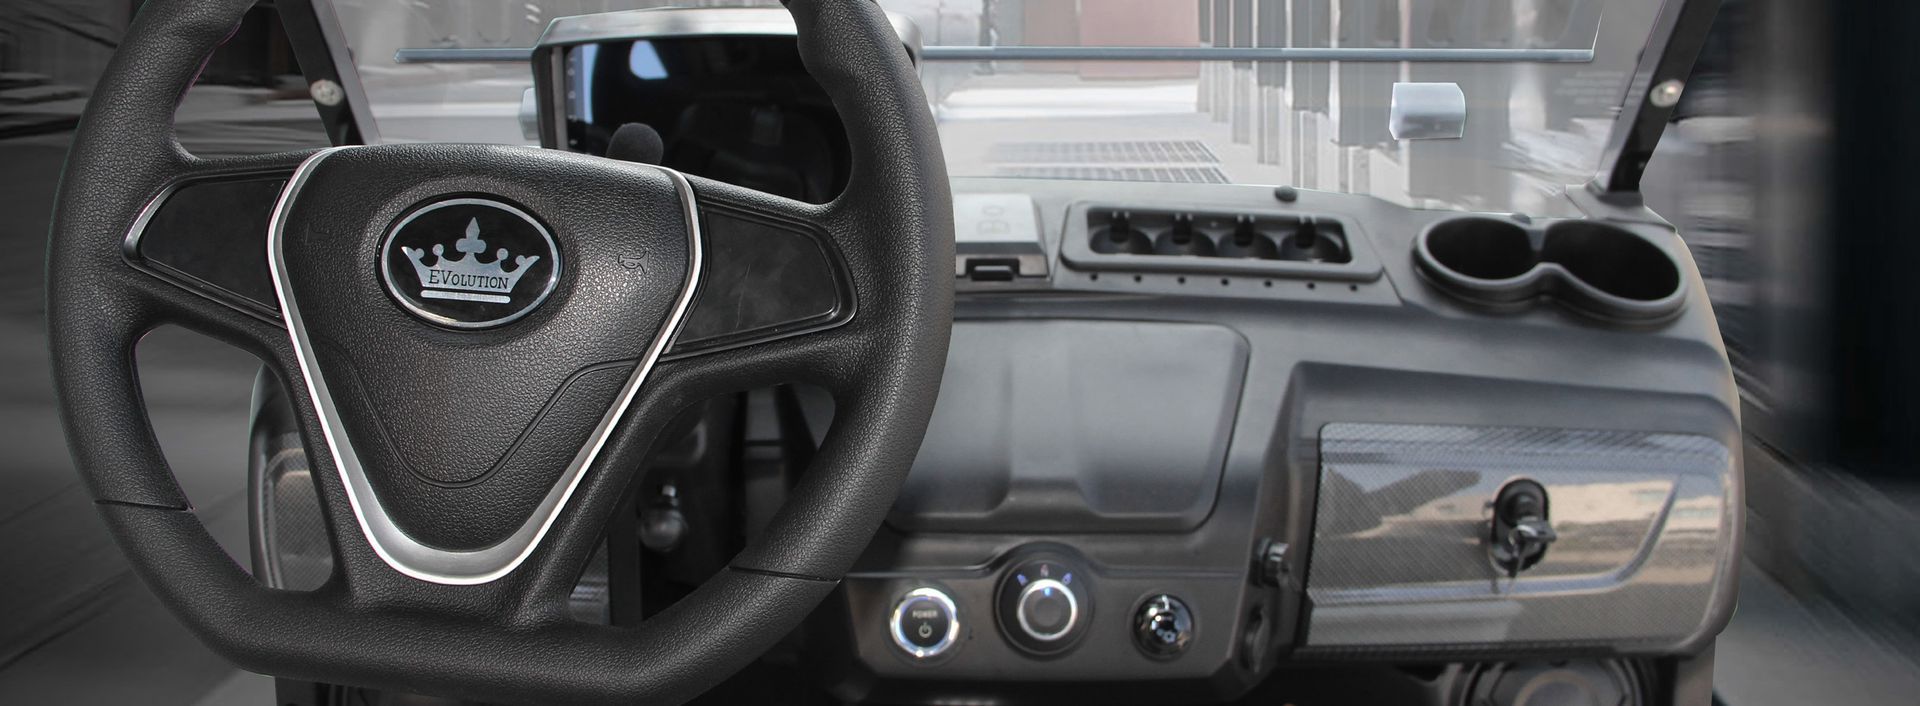 The interior of a golf cart with a steering wheel and dashboard.